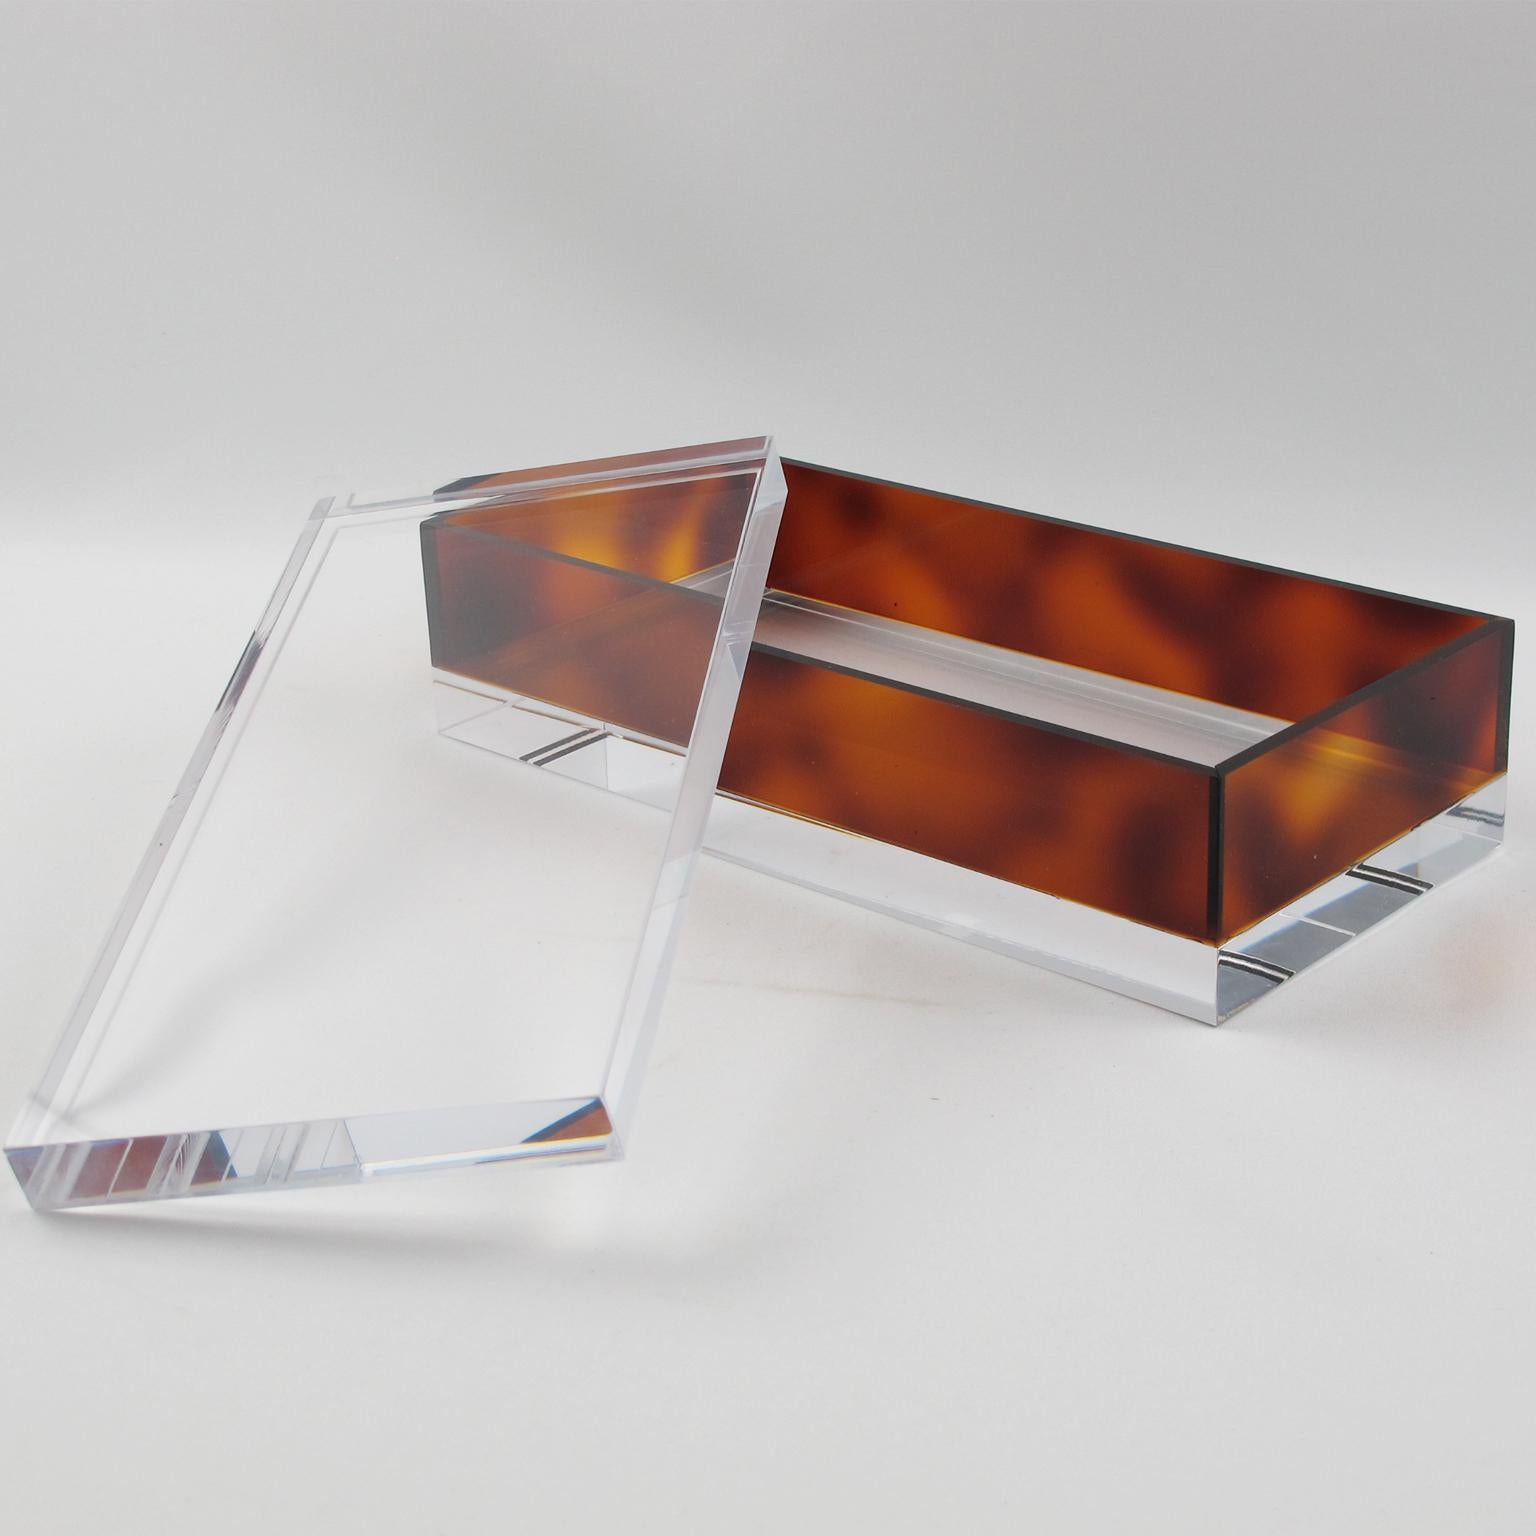 Stylish French 1970s modernist lidded box. Crystal clear and faux tortoiseshell color Lucite or plexiglass, long geometric rectangular shape. No visible maker's mark.
Measurements: 9.07 in. wide (23 cm) x 4.50 in. deep (11.5 cm) x 2.75 in. high (7